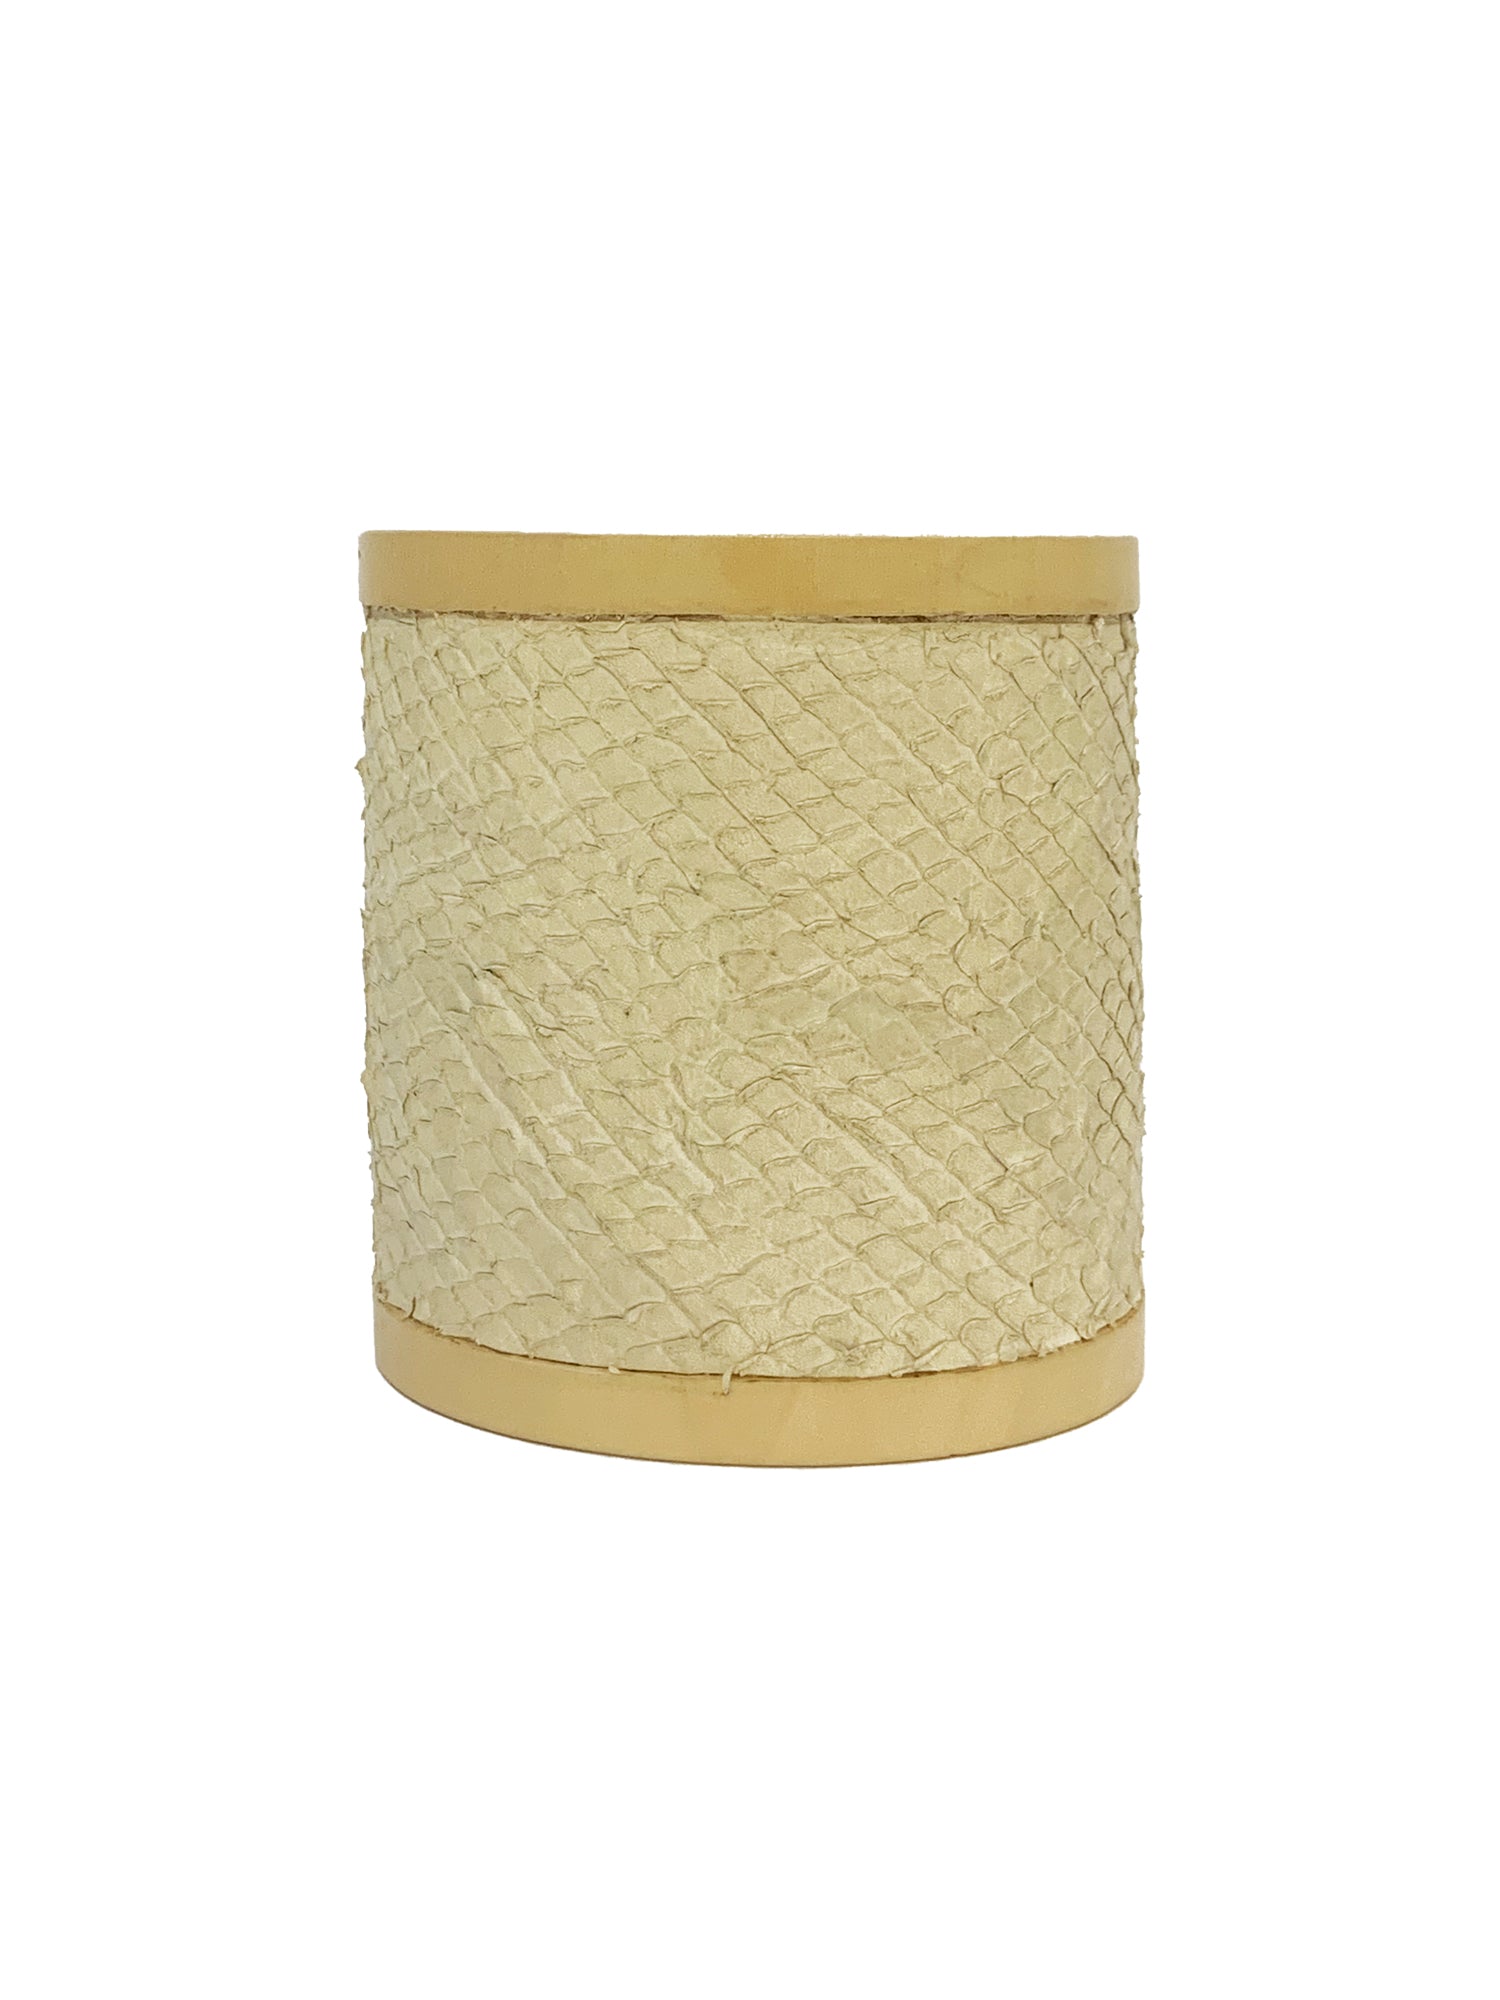 Leather & White Wood Cuff Bracelet - Off-White